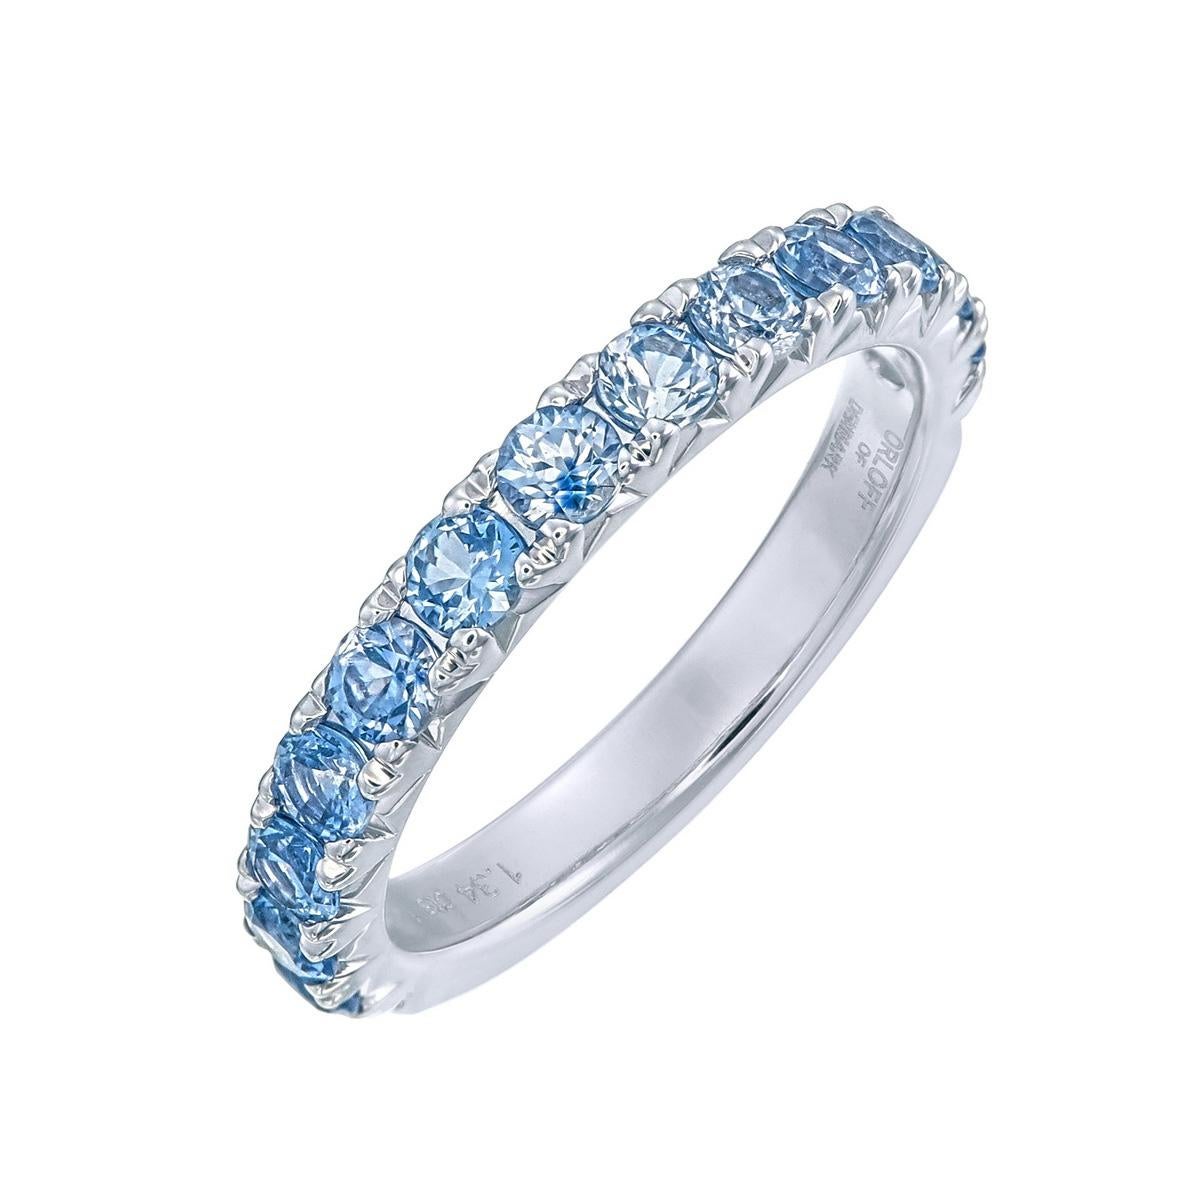 Orloff of Denmark;
Drape your finger in the cool elegance of this 1.34 carat Blue Sapphire Half-Band Ring, set in the timeless sophistication of 14 Karat white gold. Each sapphire, meticulously chosen for its vibrant azure hue, aligns in a delicate